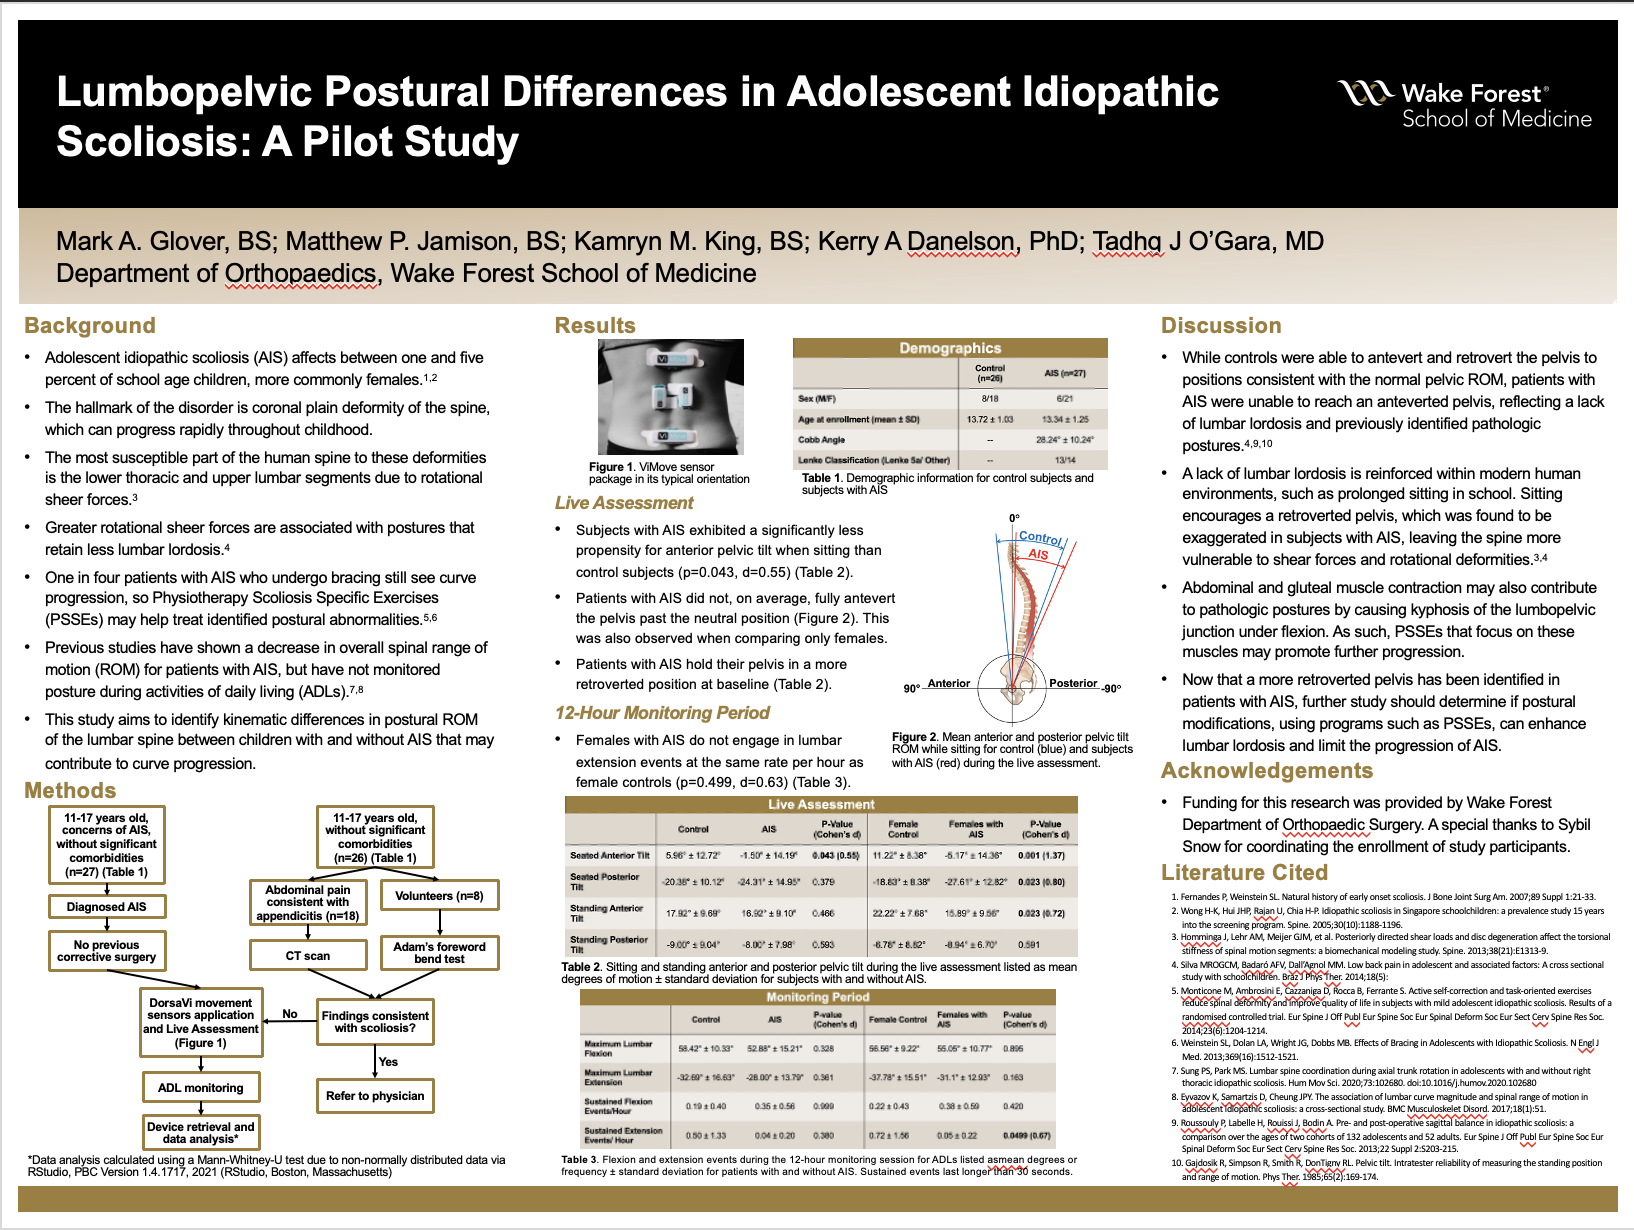 Showcase Image for Lumbopelvic Postural Differences in Adolescent Idiopathic Scoliosis: A Pilot Study 